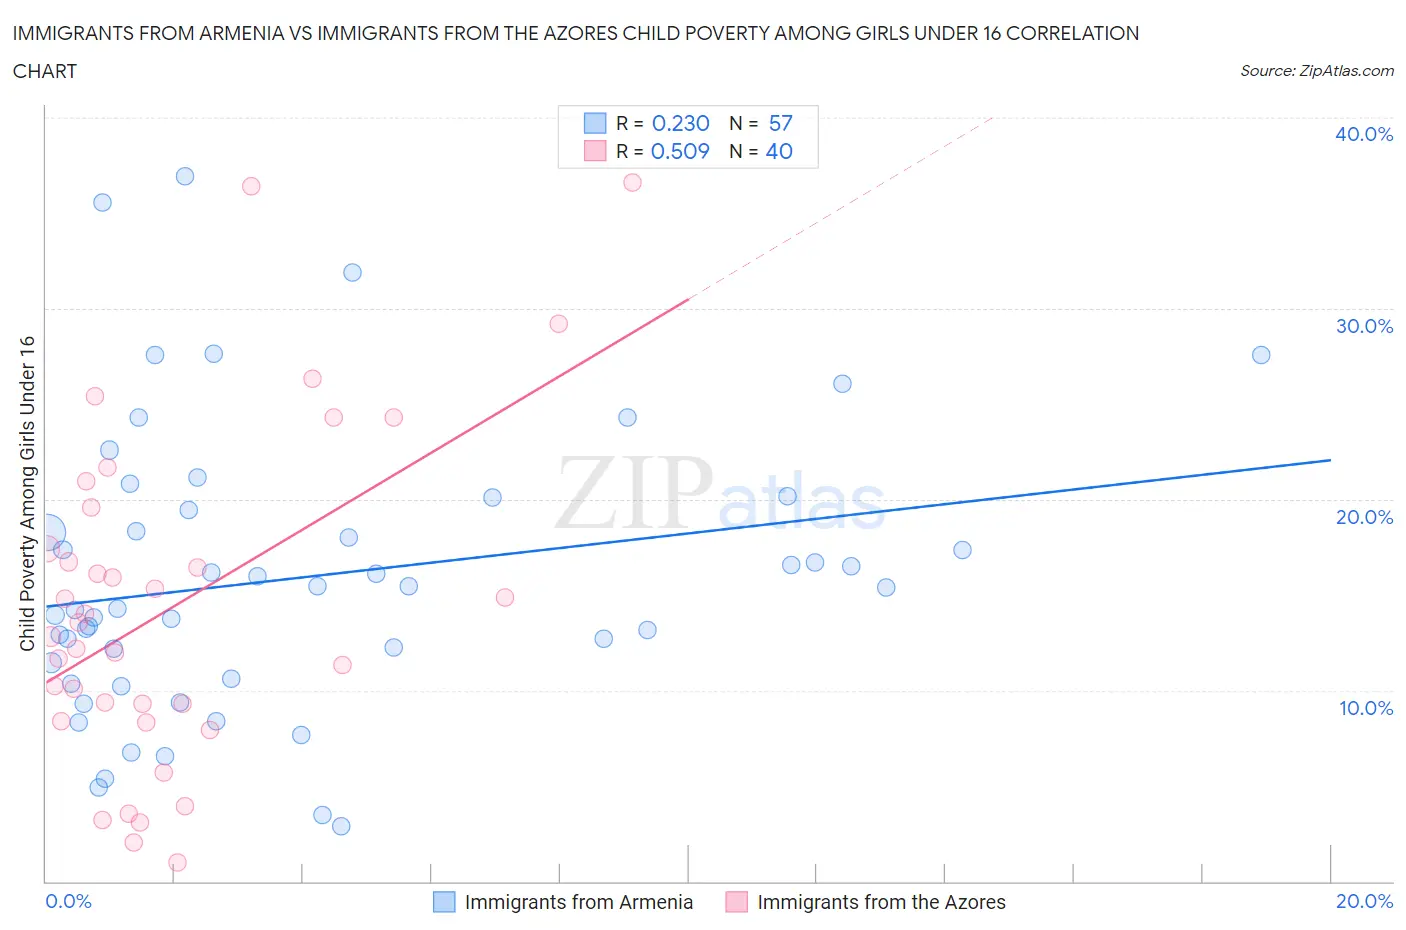 Immigrants from Armenia vs Immigrants from the Azores Child Poverty Among Girls Under 16